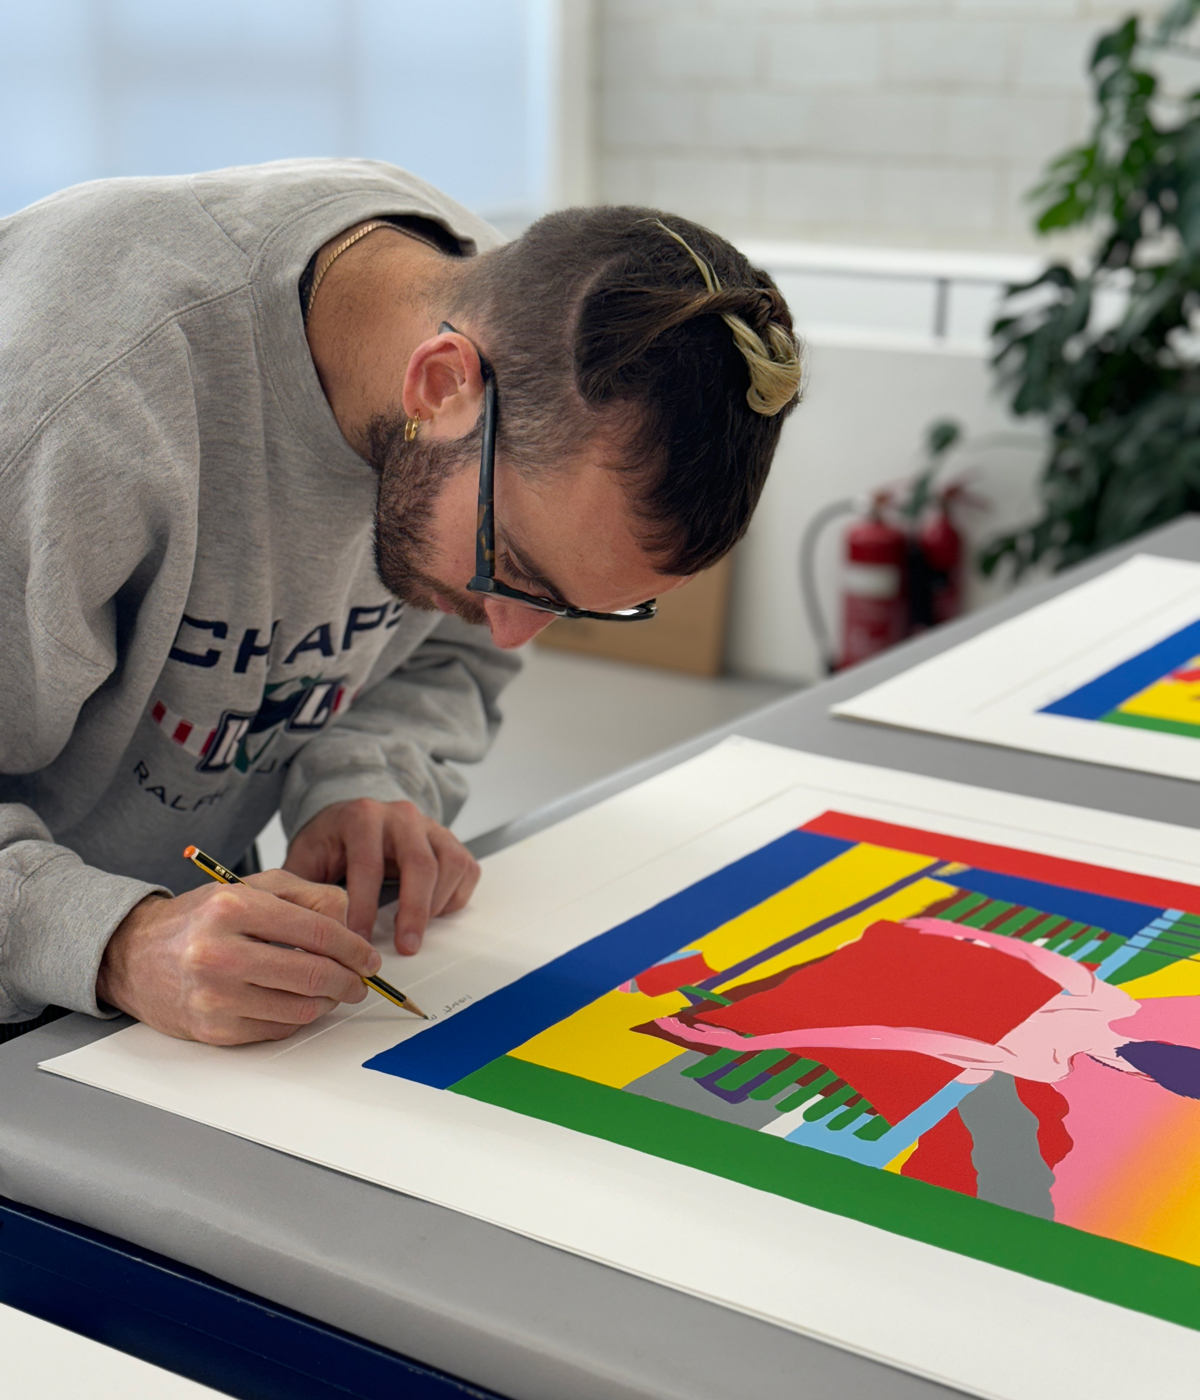 The artist signing his print 